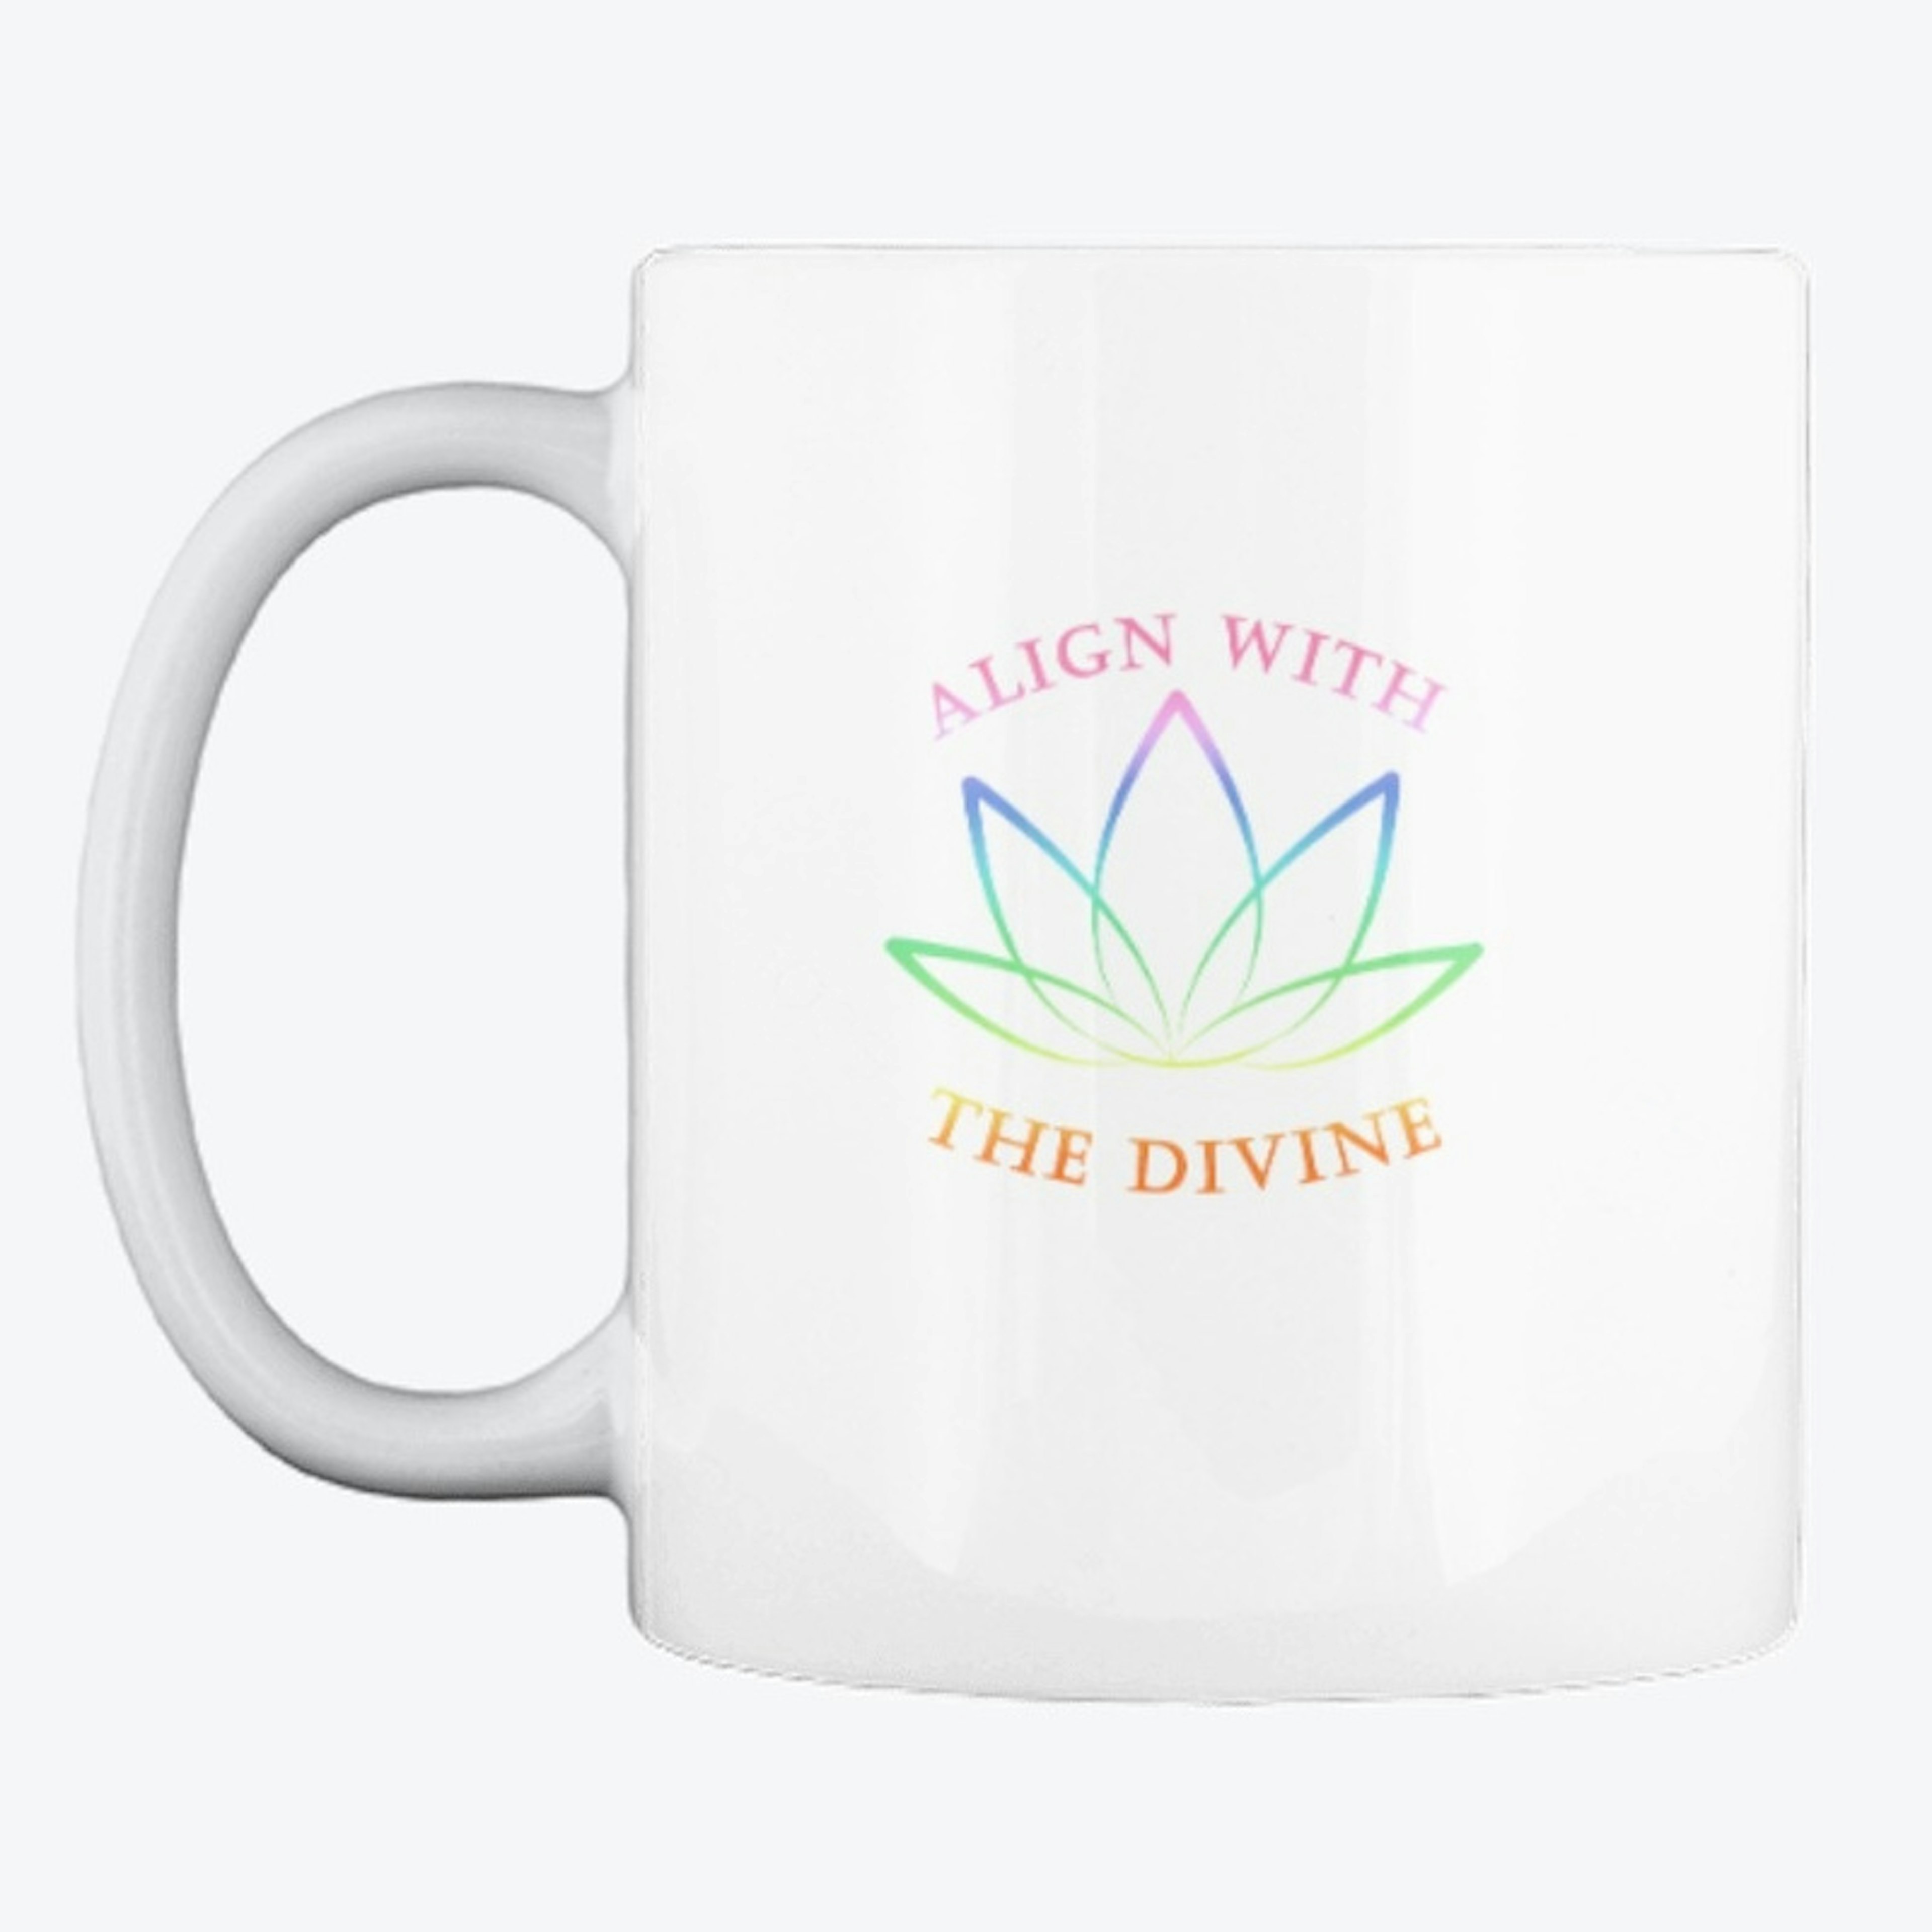 Align With the Divine